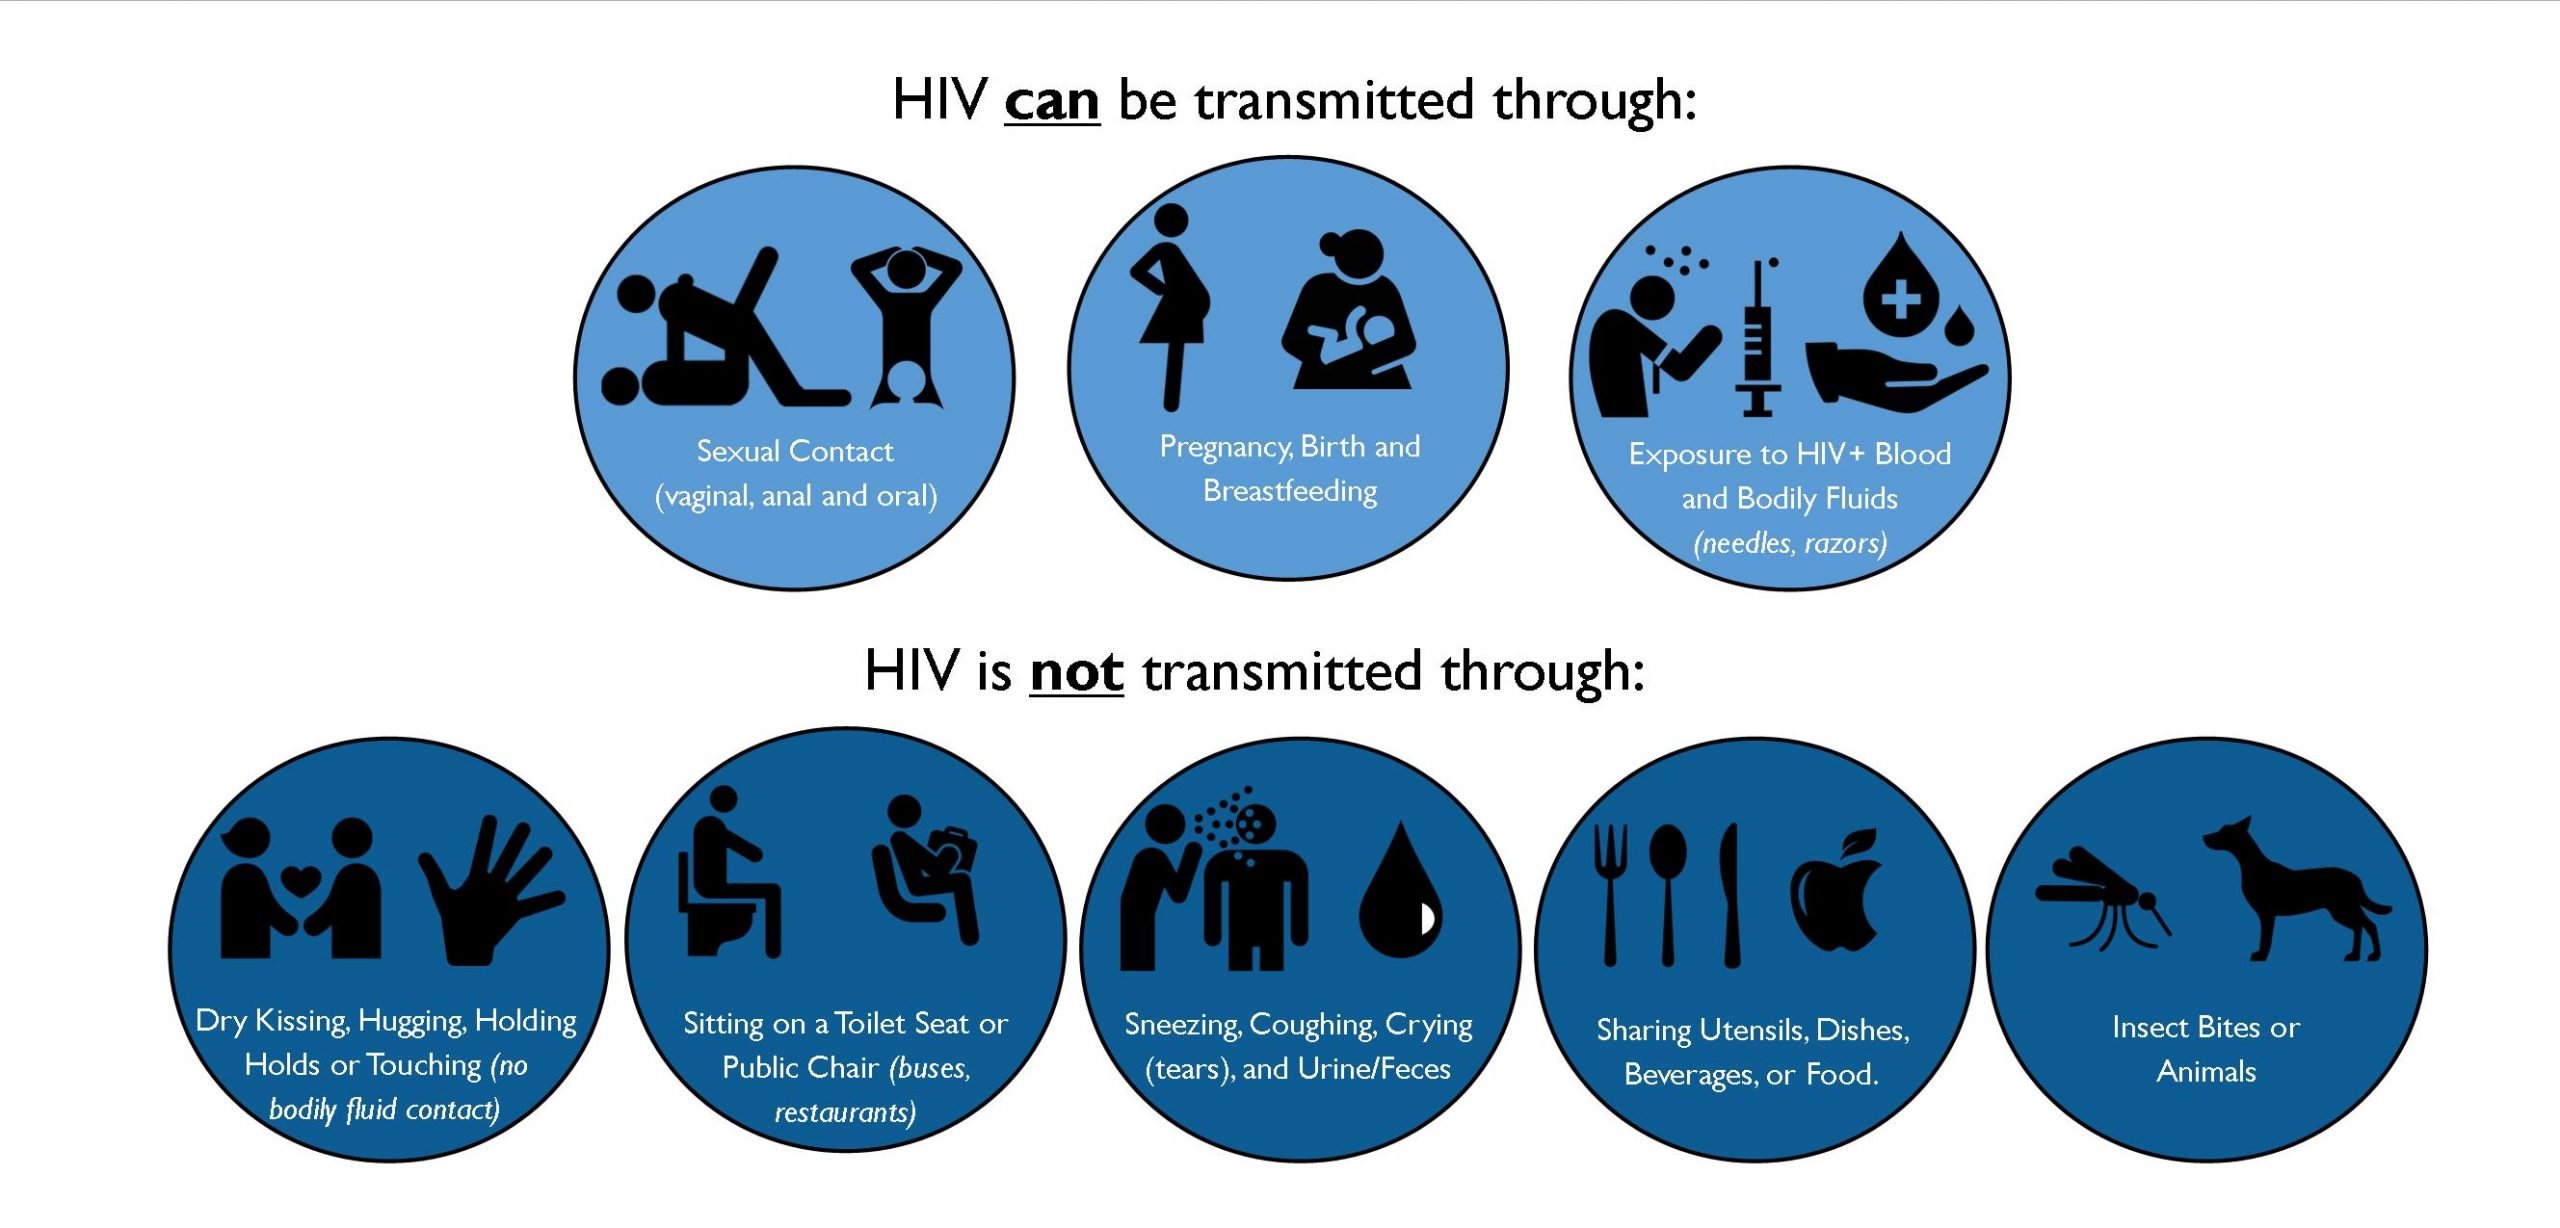 AIDS/HIV in Lesotho: We Can Help!